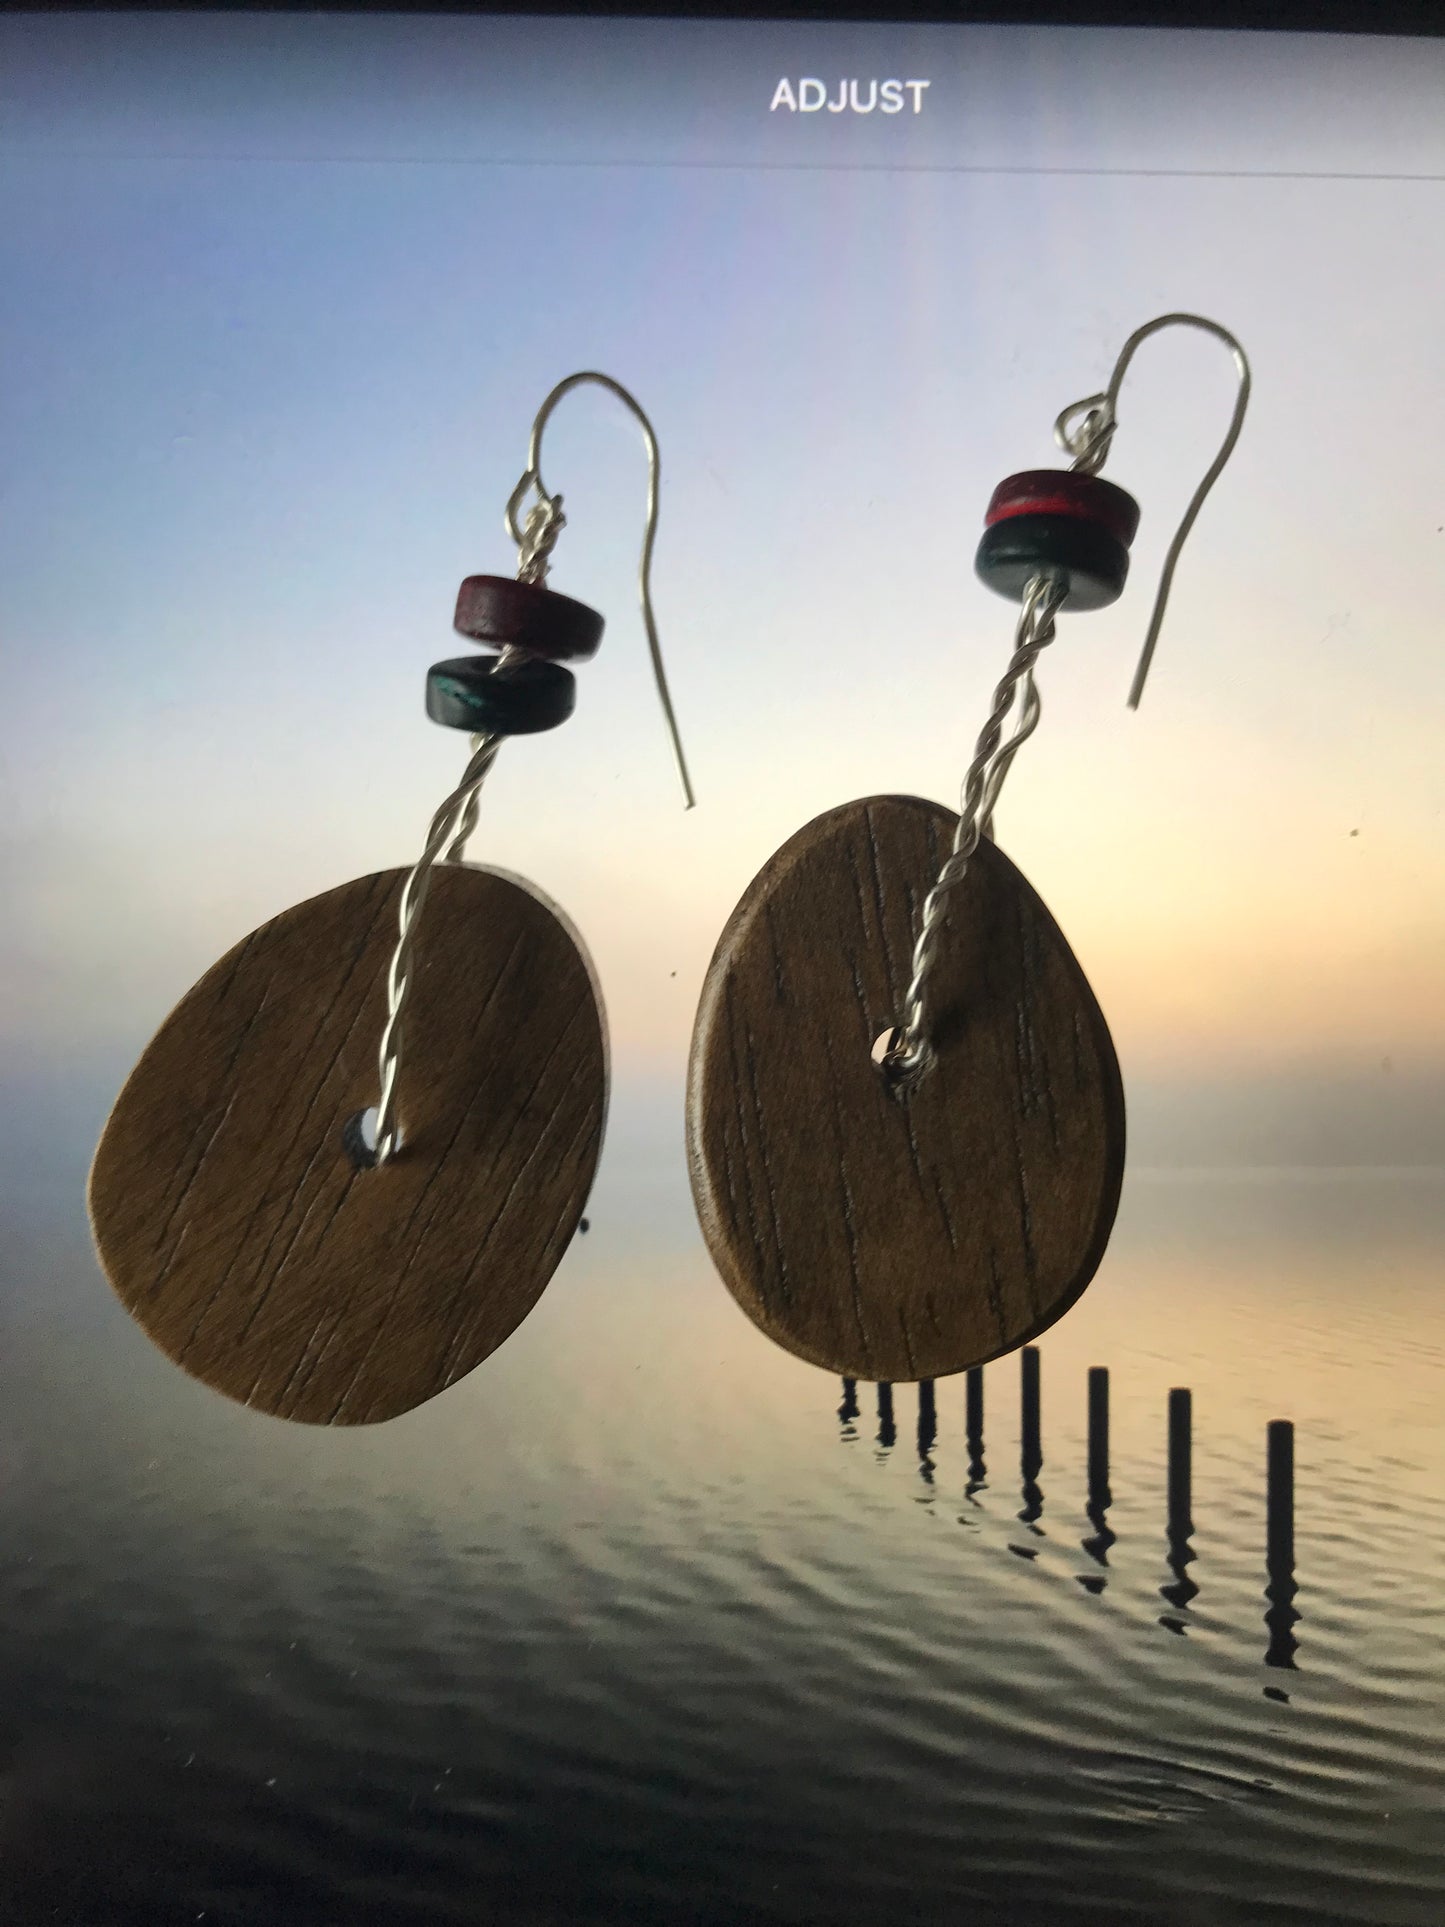 Wooden large beads on wire earrings